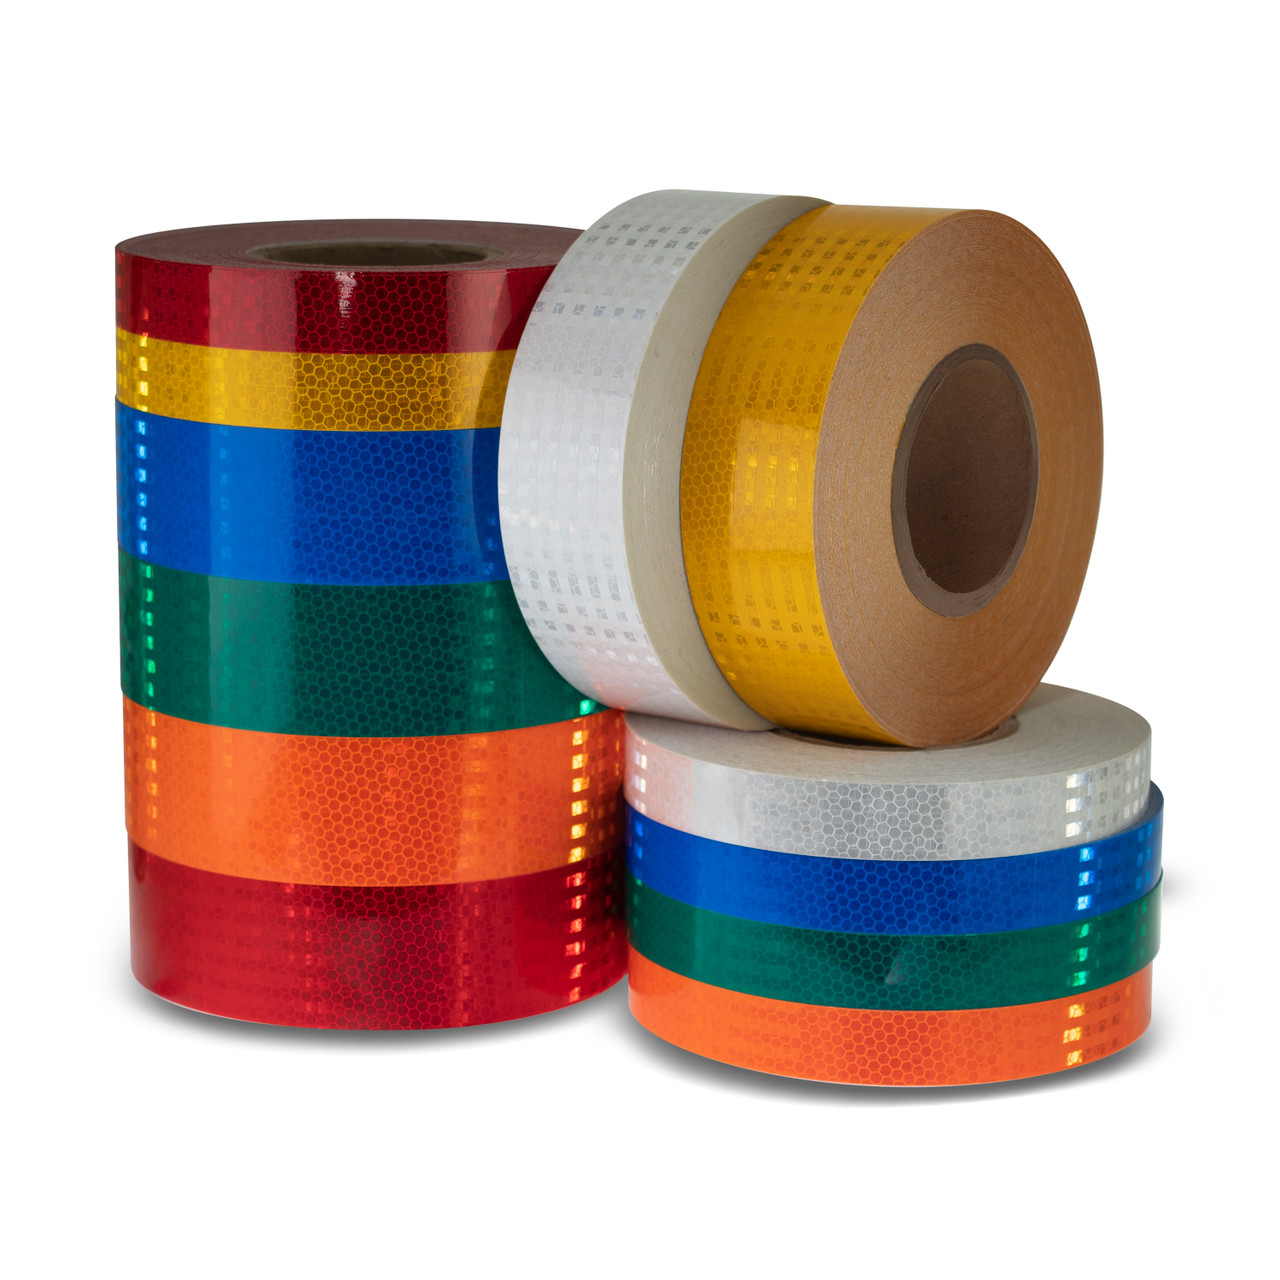 Reflective Tapes, Avery Dennison